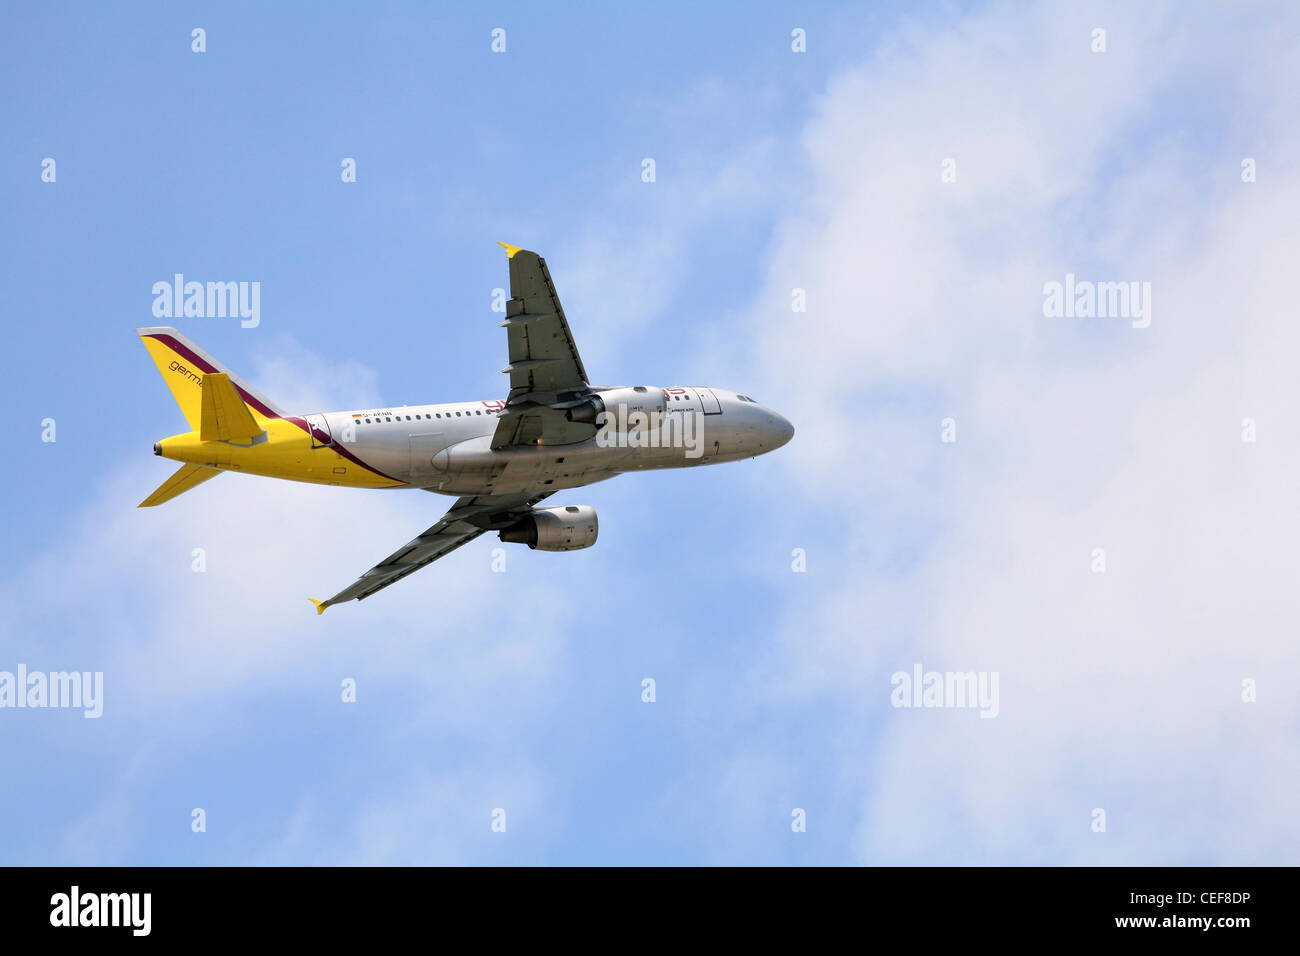 Passenger plane, Airbus A 319, Germanwings Airline, in climb flight Stock Photo